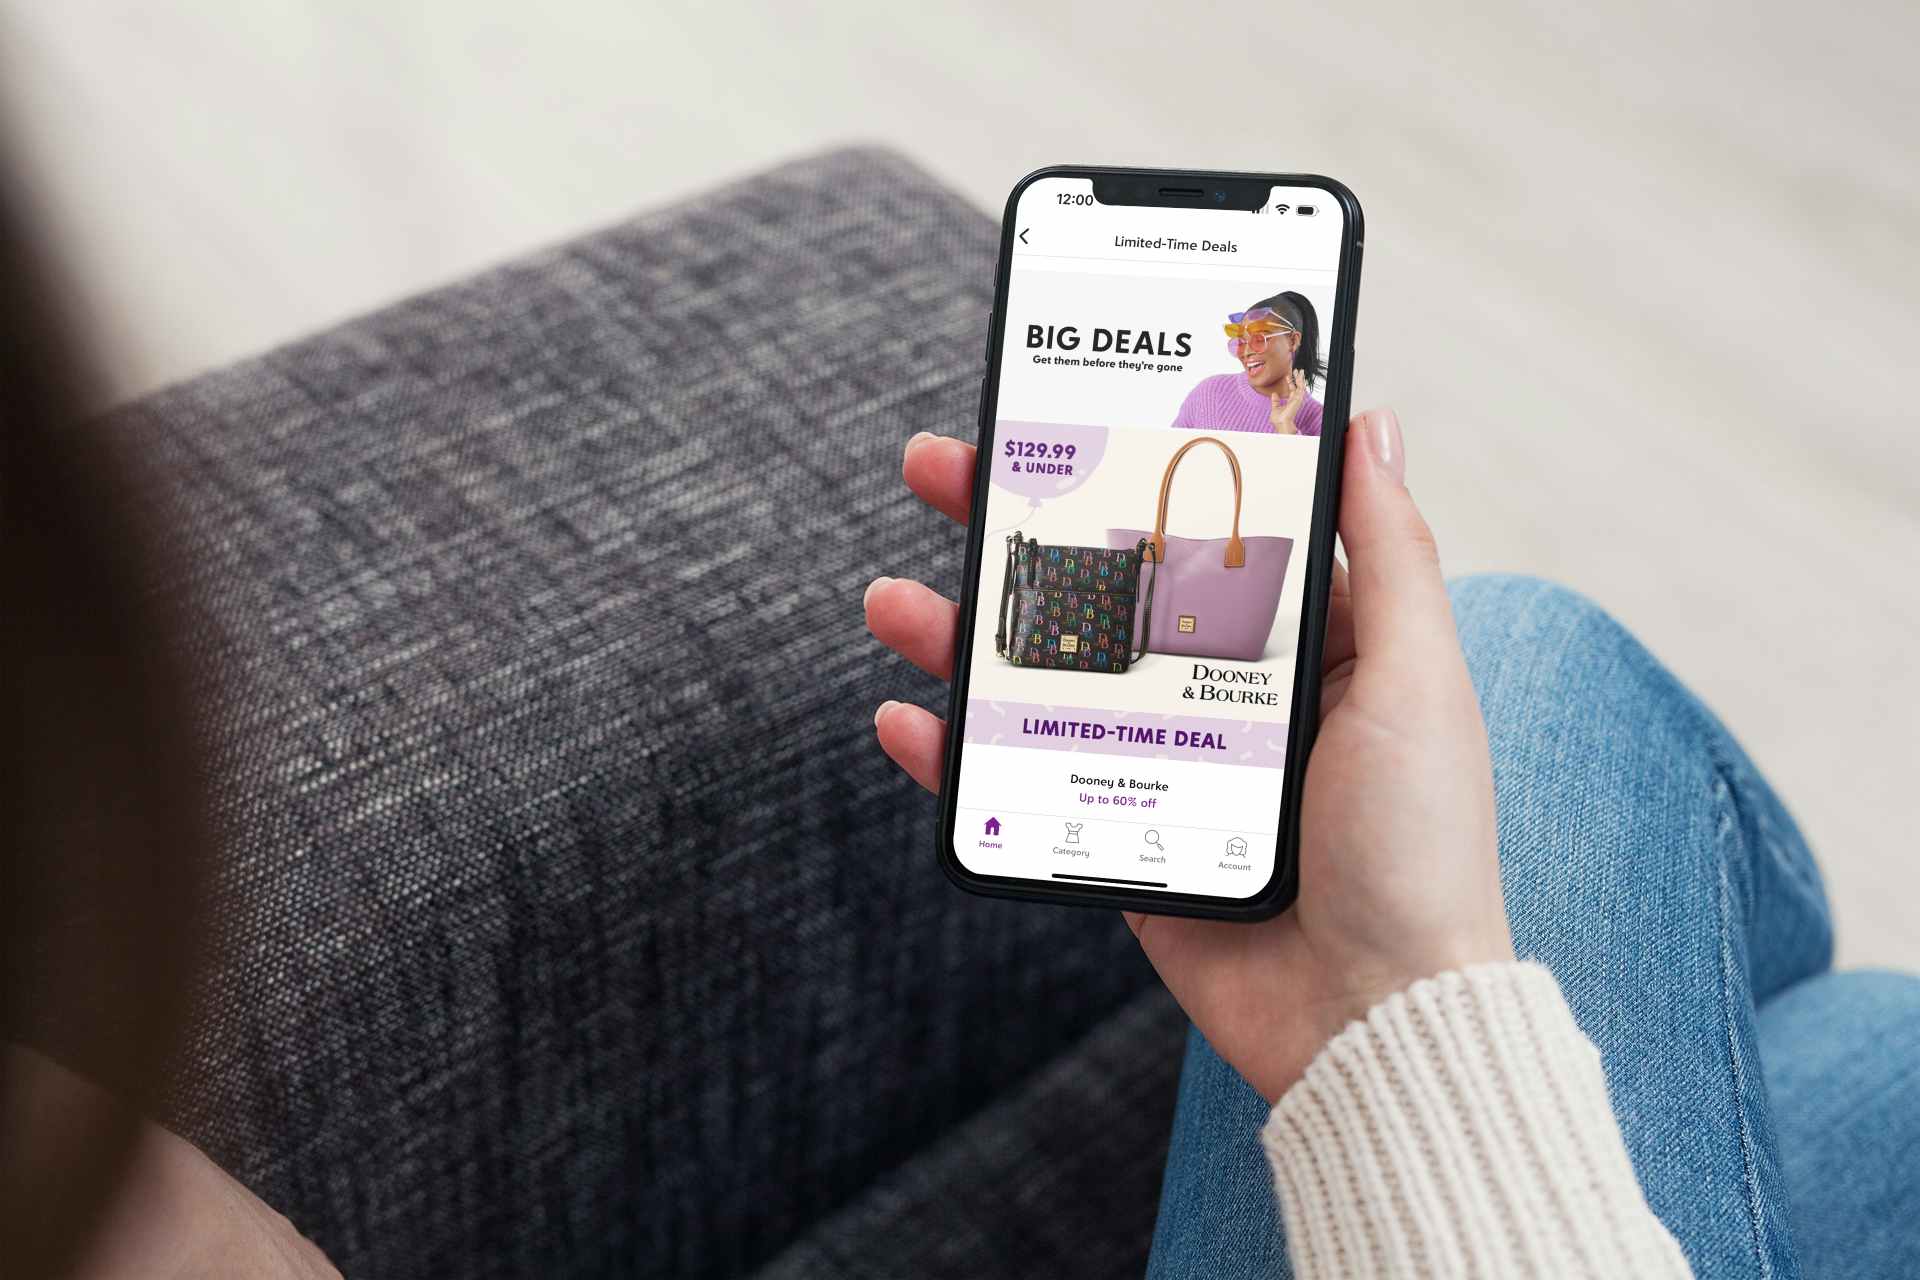 A woman looking at "Today's Deals" in the Zulily mobile app, which features a full list of the best limited-time deals available today.